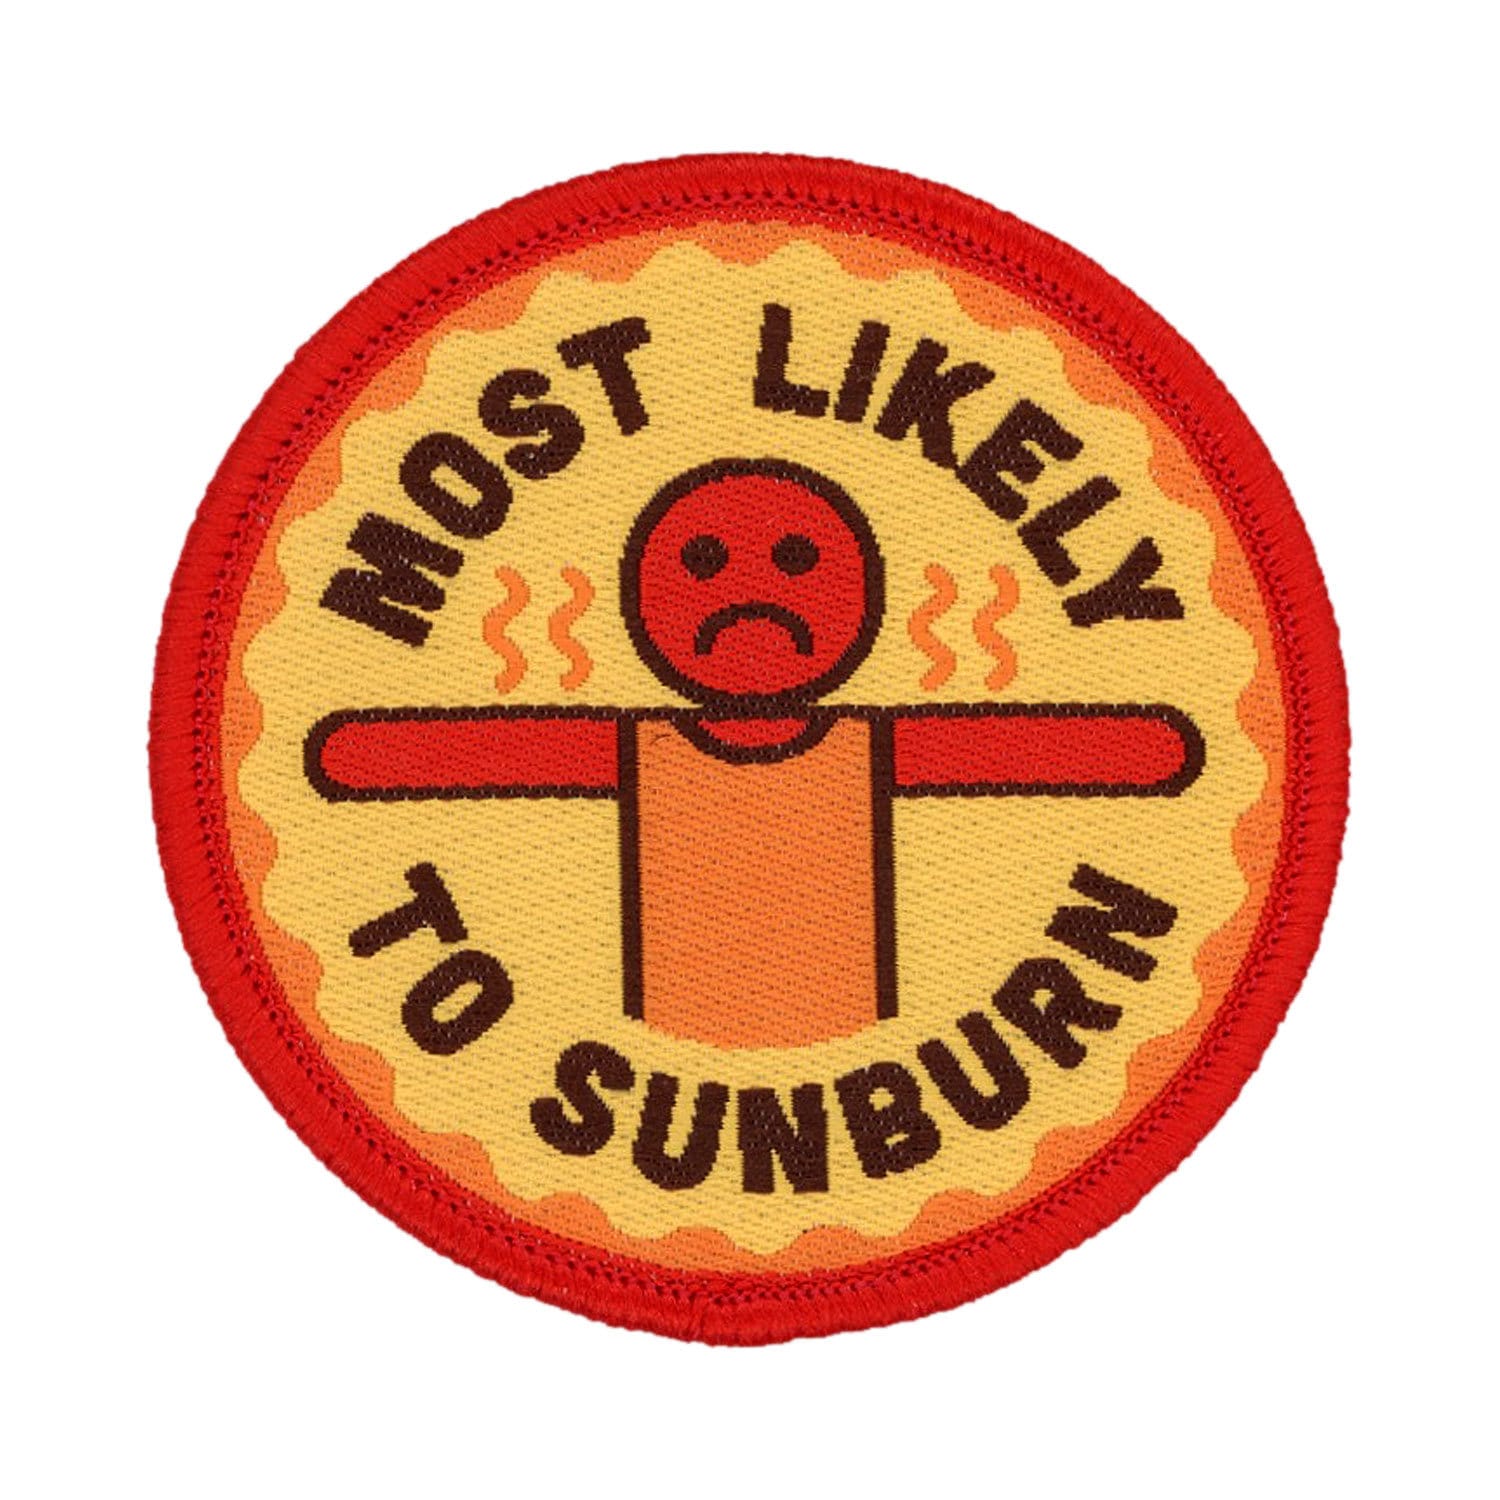 Most Likely to Sunburn Funny Iron on Patch Woven Glue Backed Camping Patches  Backpack Patches Cool Funny Camp Patches for Jackets 